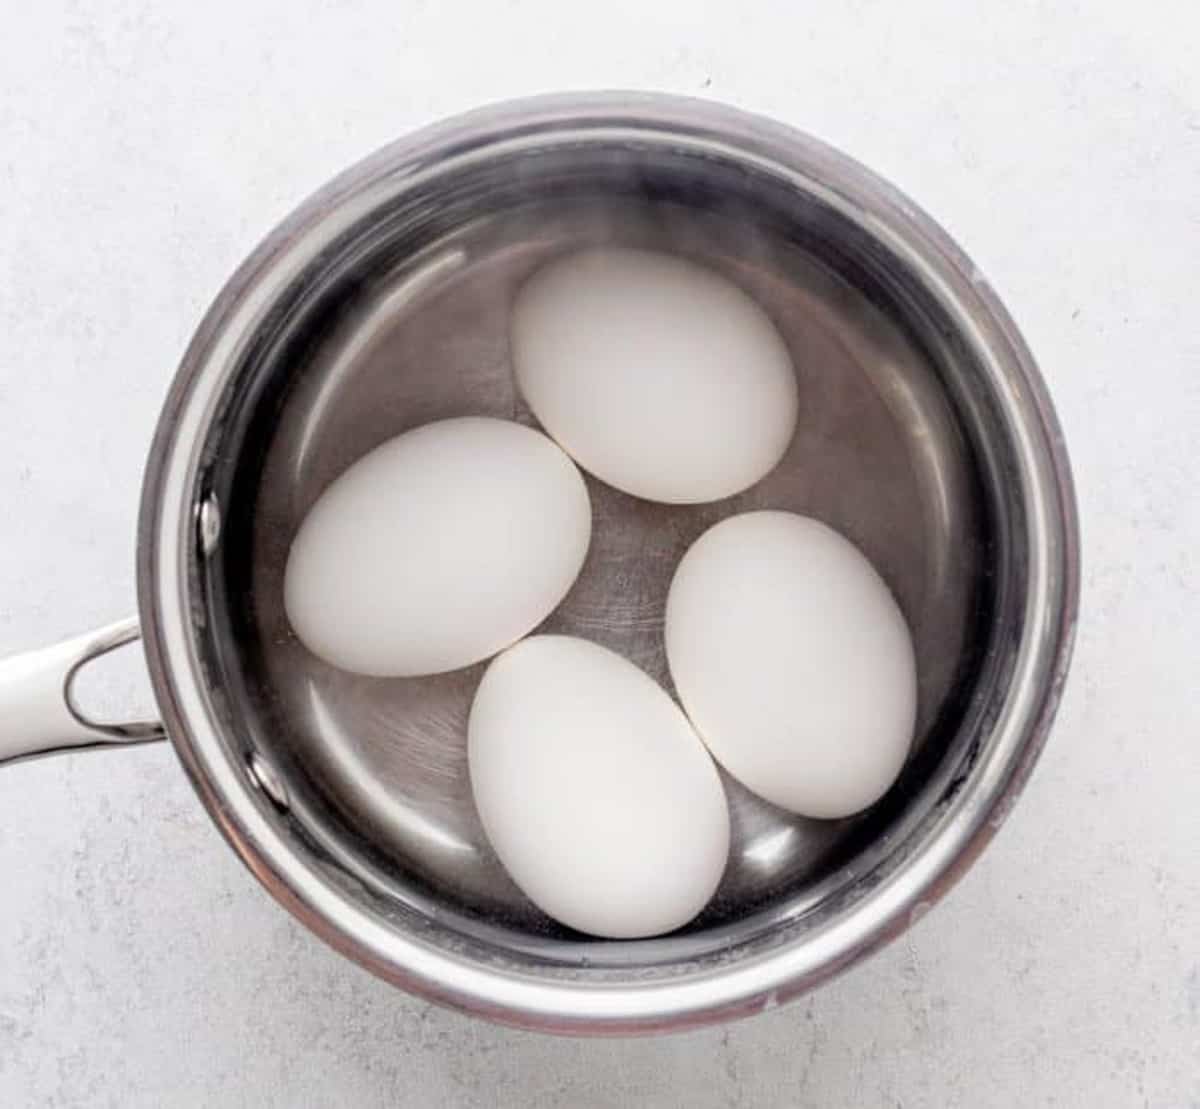 Four hard boiled eggs in a small sauce pan.